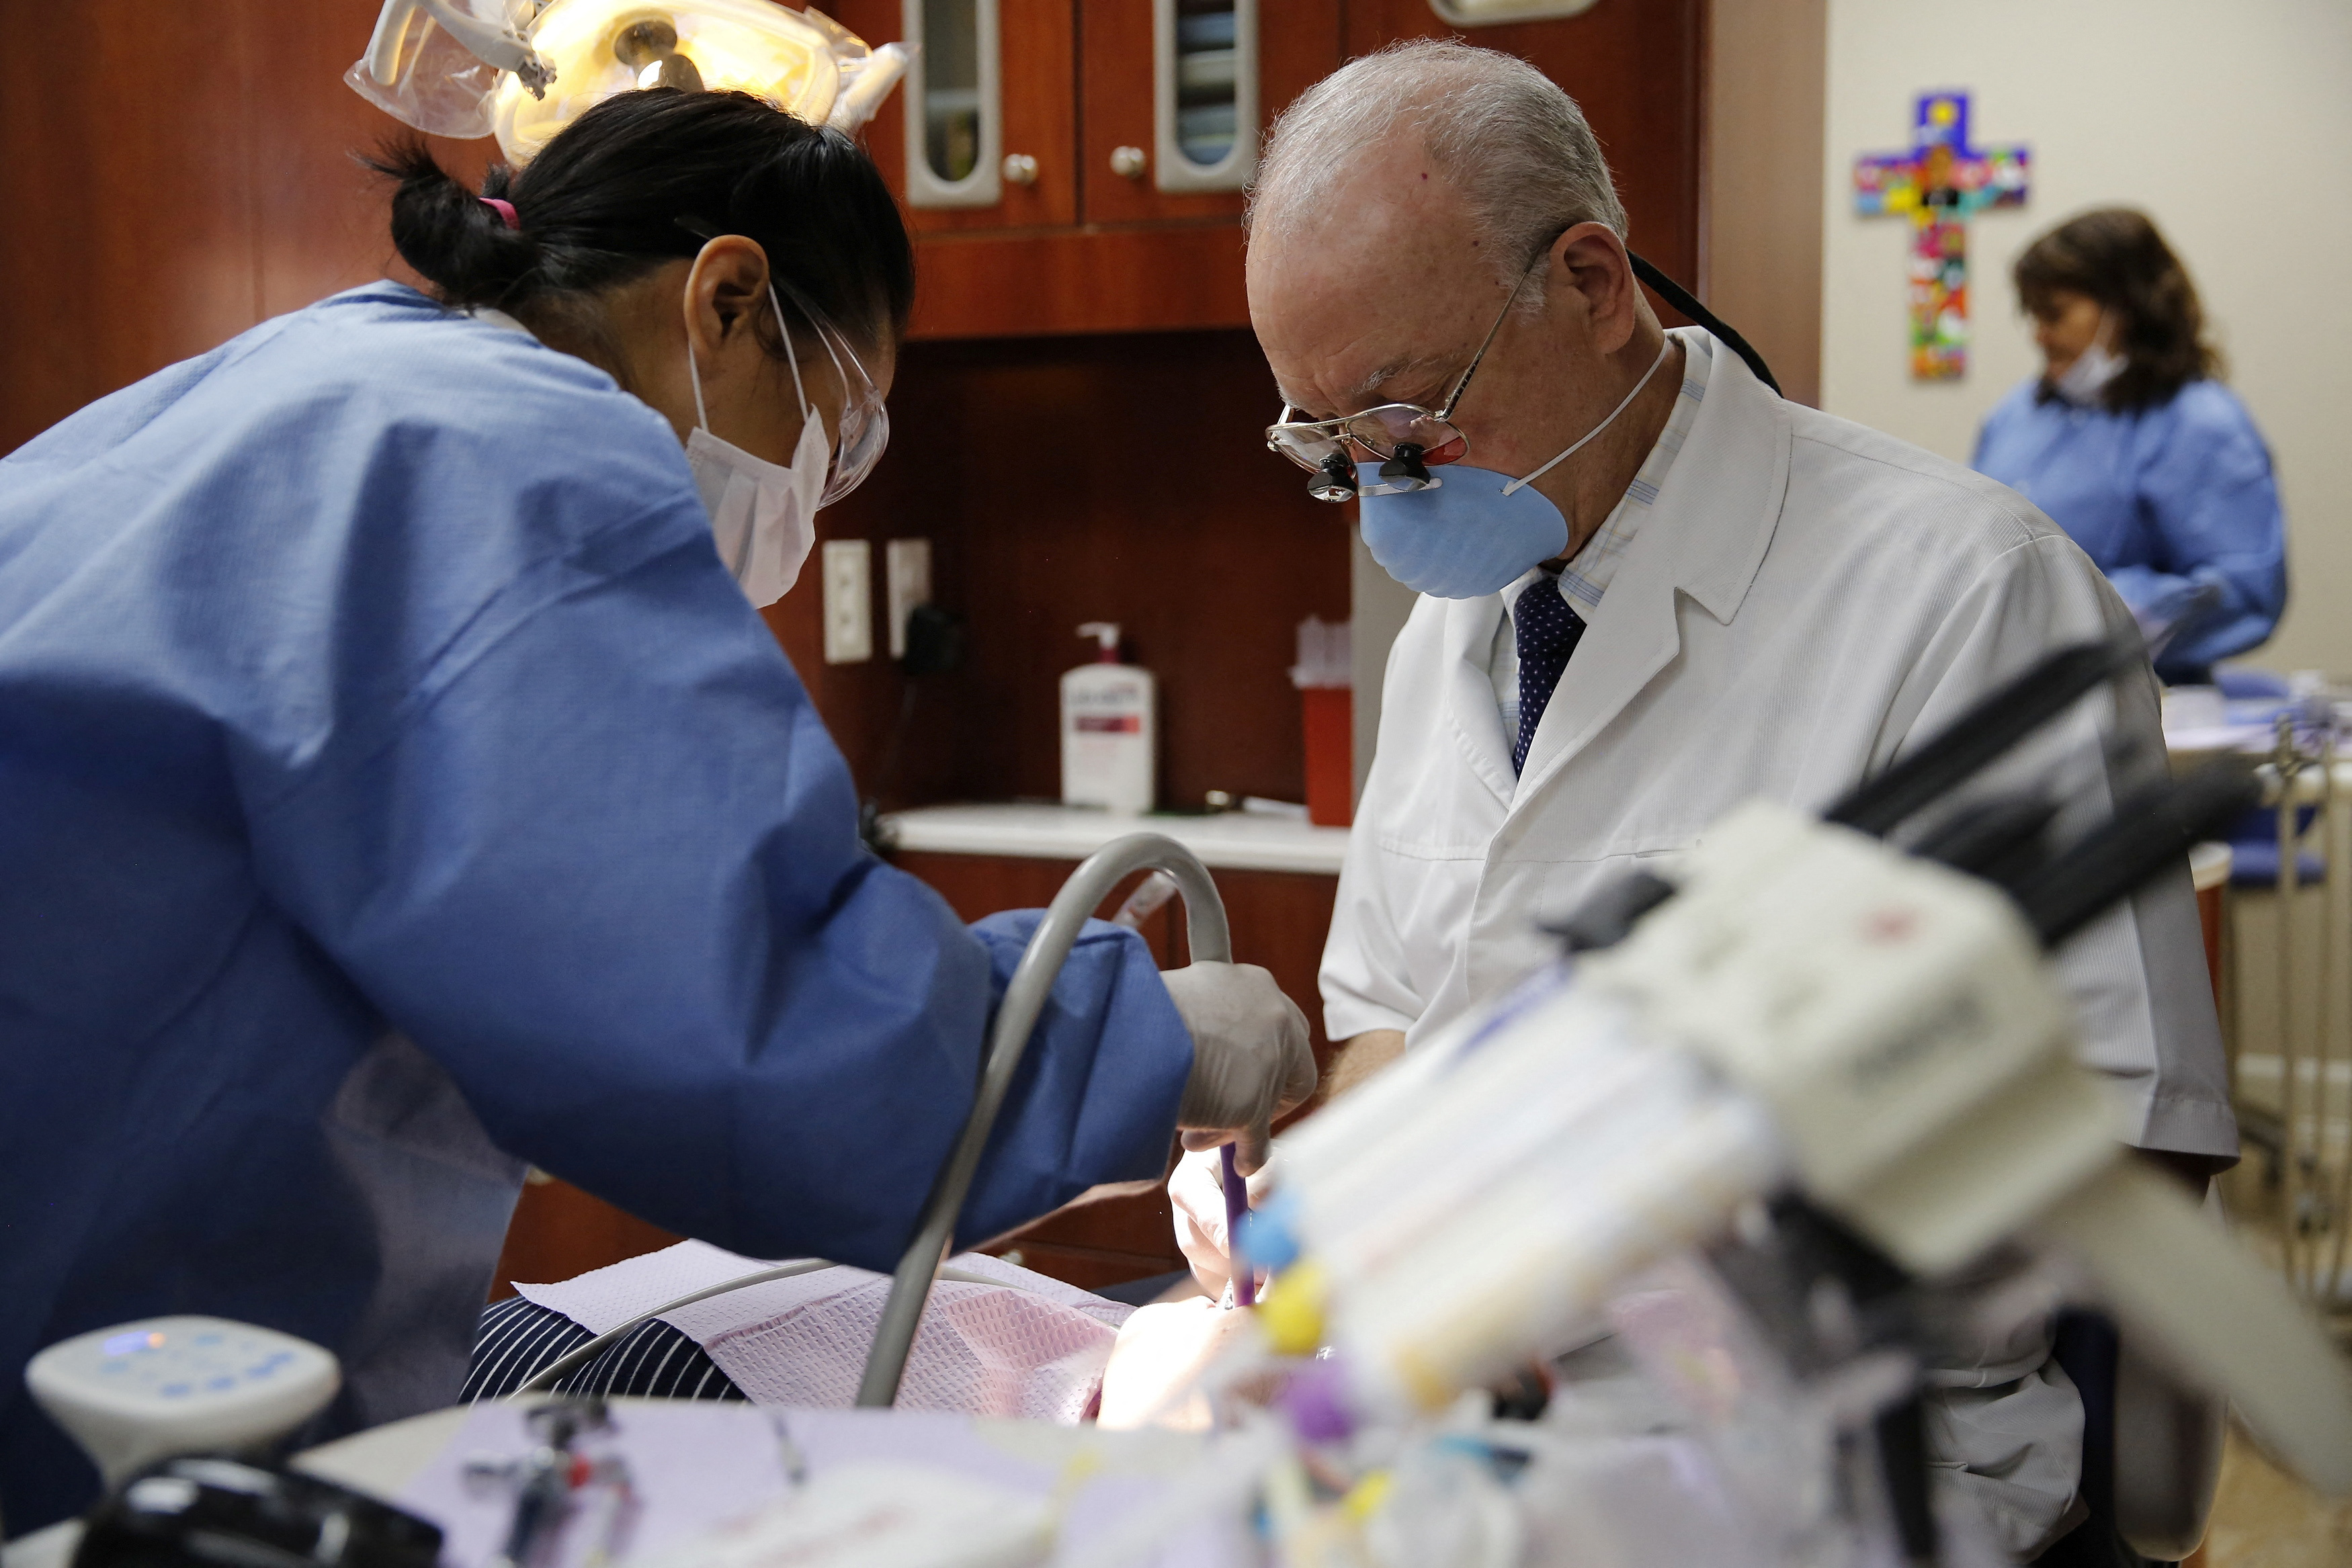 Clients use dental services at the Spanish Catholic Center agency of the Diocese of Washington Catholic Charities in Washington